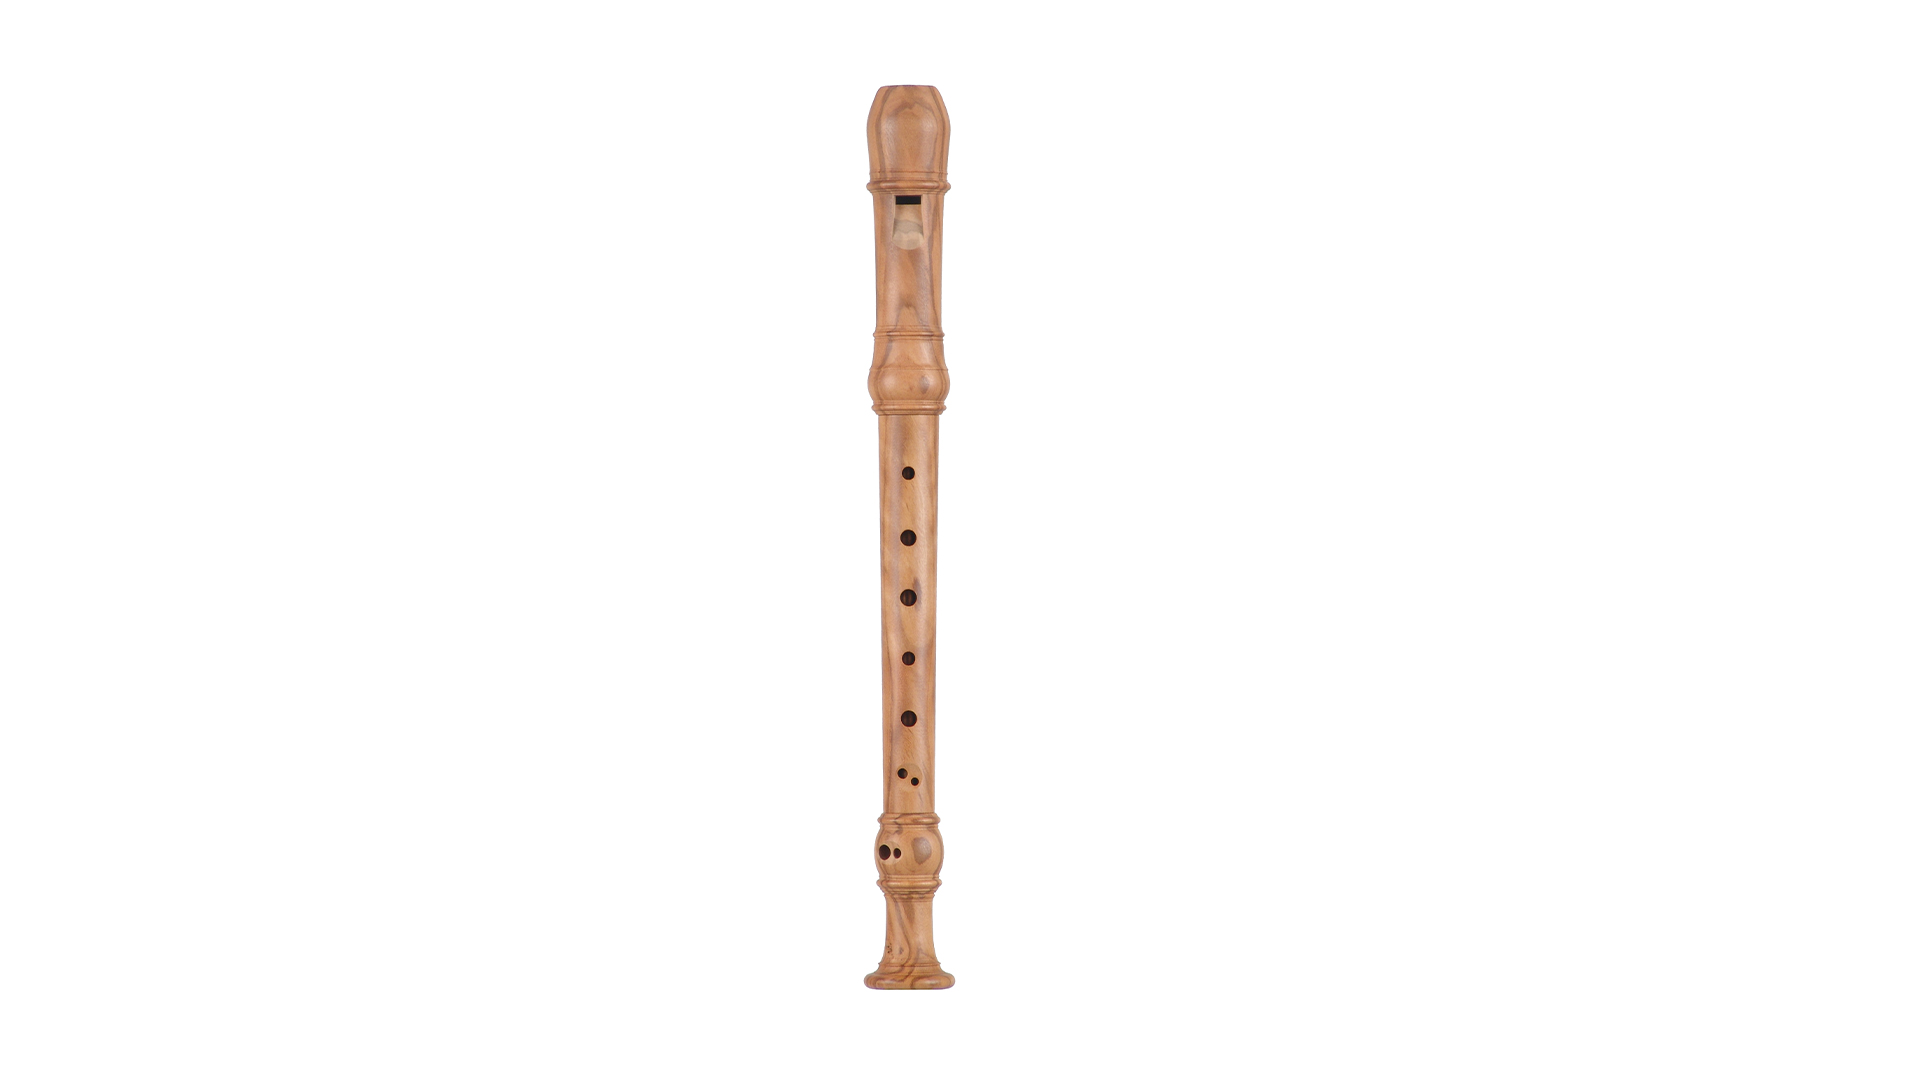 Huber, early baroque, "Master", soprano in c'', baroque double hole, 442 Hz, olive